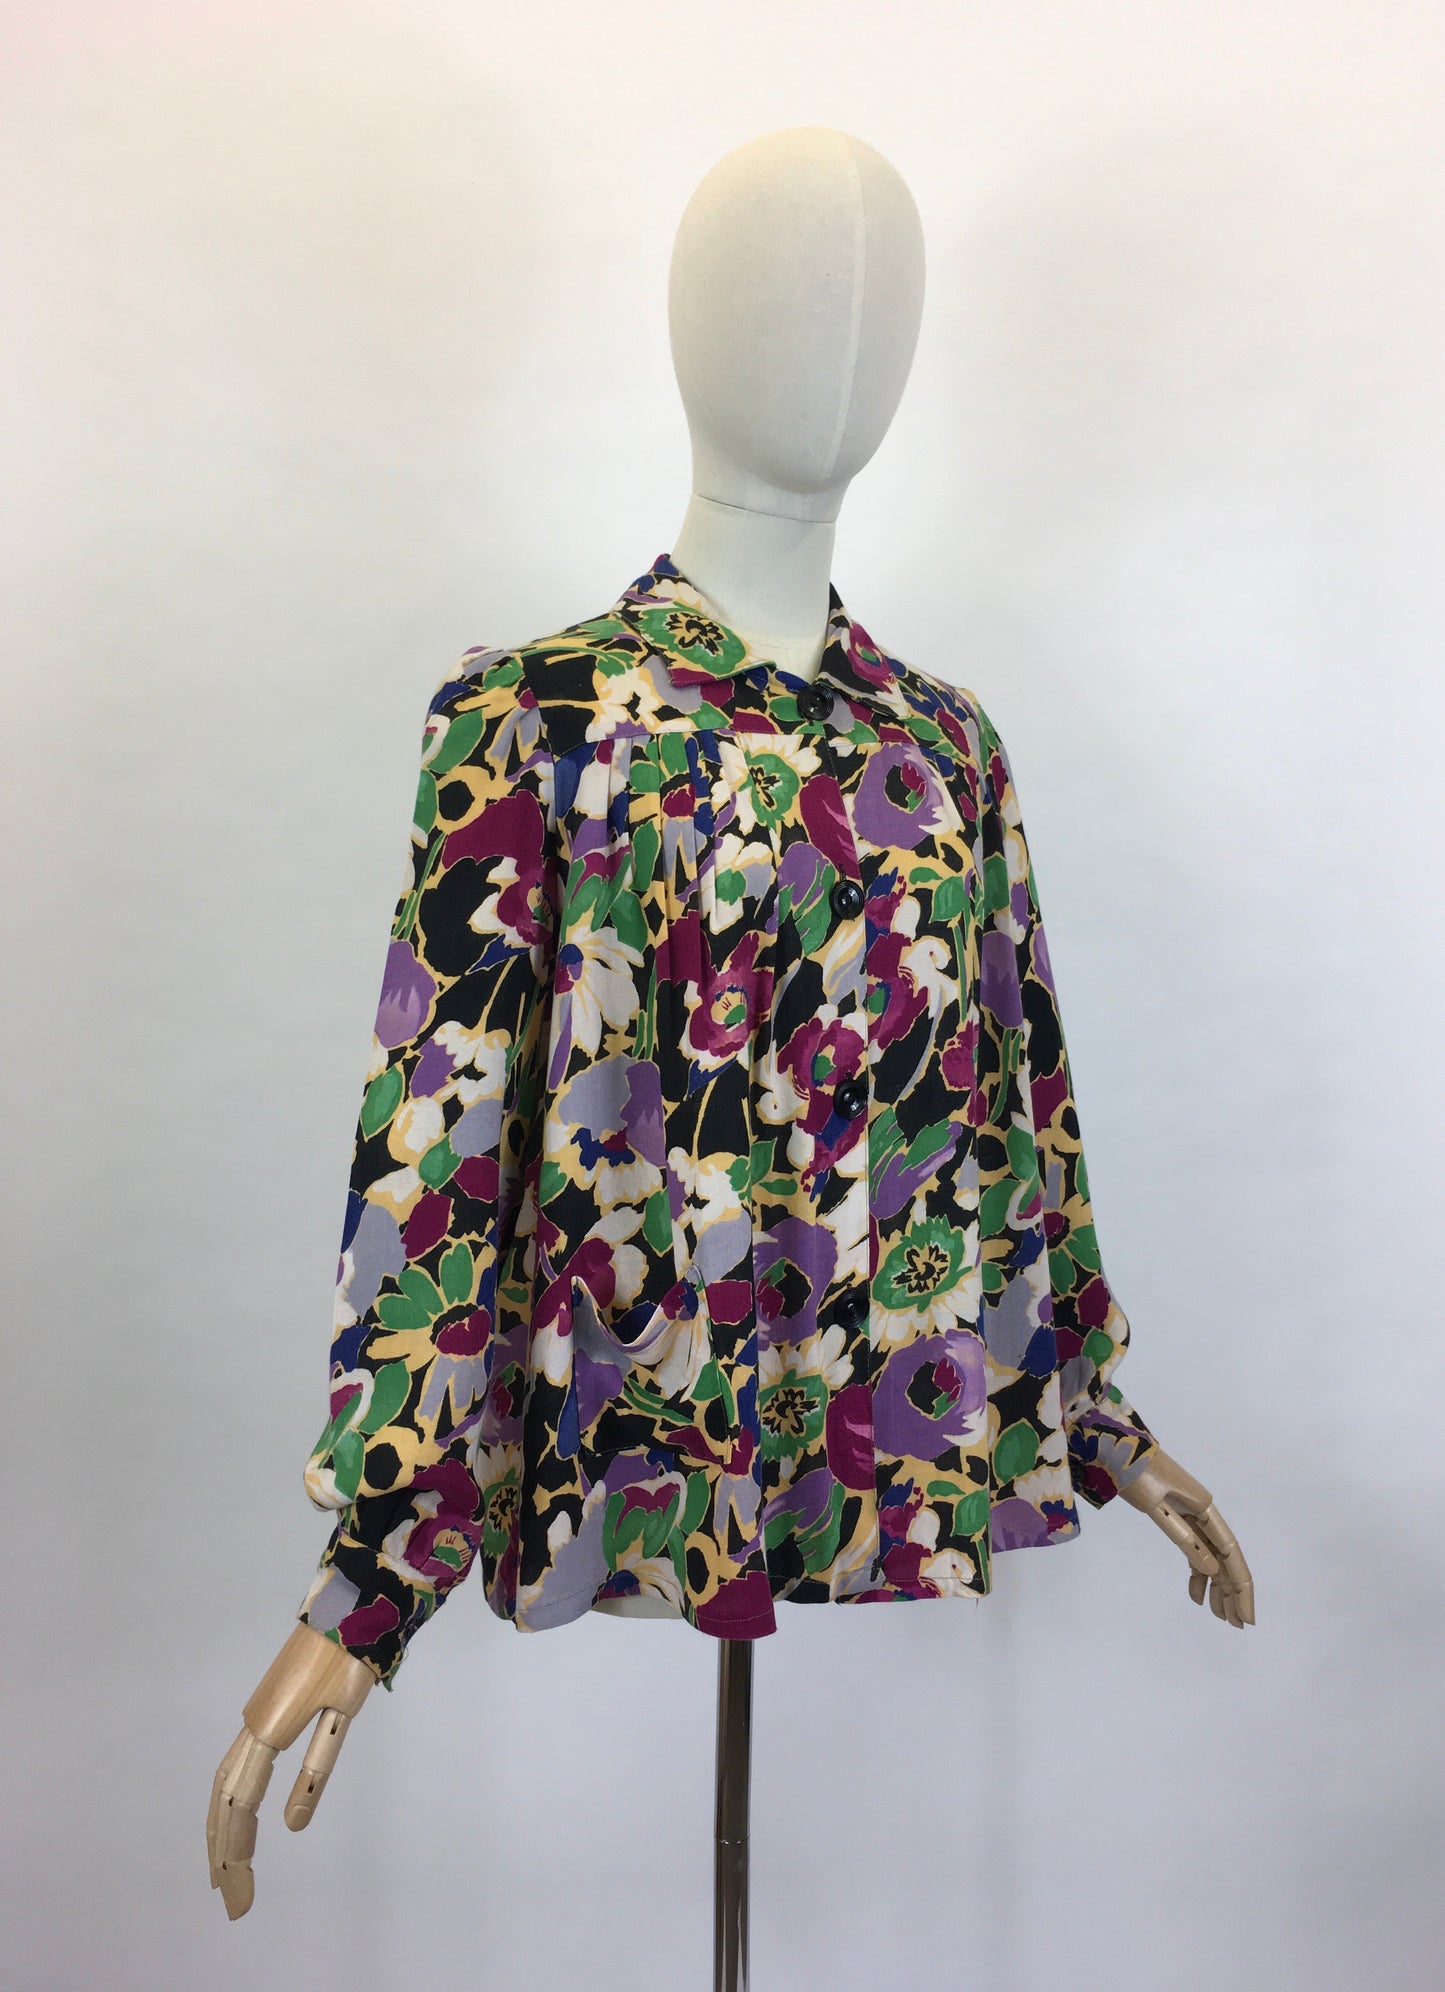 Original 1940’s FABULOUS CC41 Utility Blouse - In A Darling Floral Linen in A Winter Berry Palette